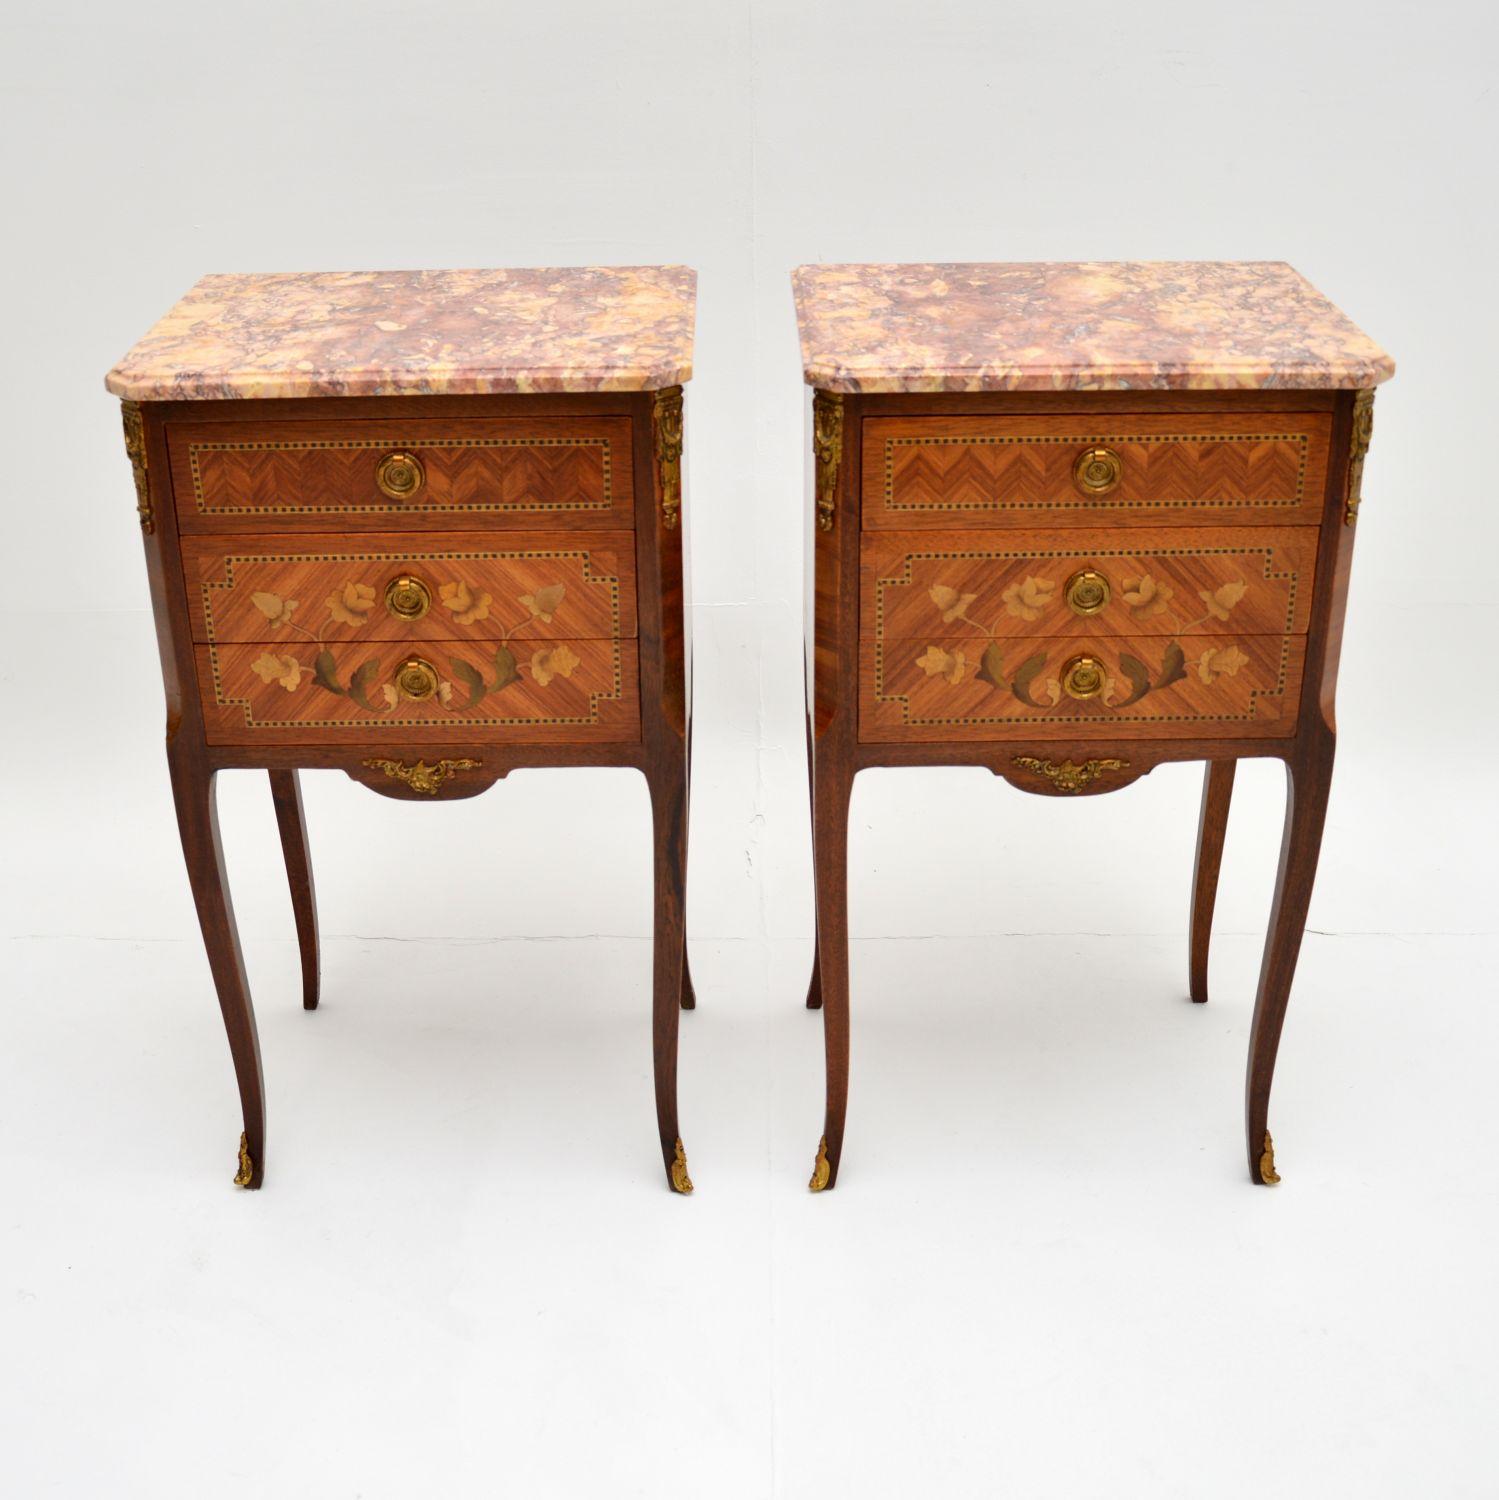 A stunning pair of antique French marble top chests on legs, which we would date from the 1900-1920’s period.

They are of amazing quality and are very versatile. The backs are nicely polished, so these could be used as bedside chests or lamp